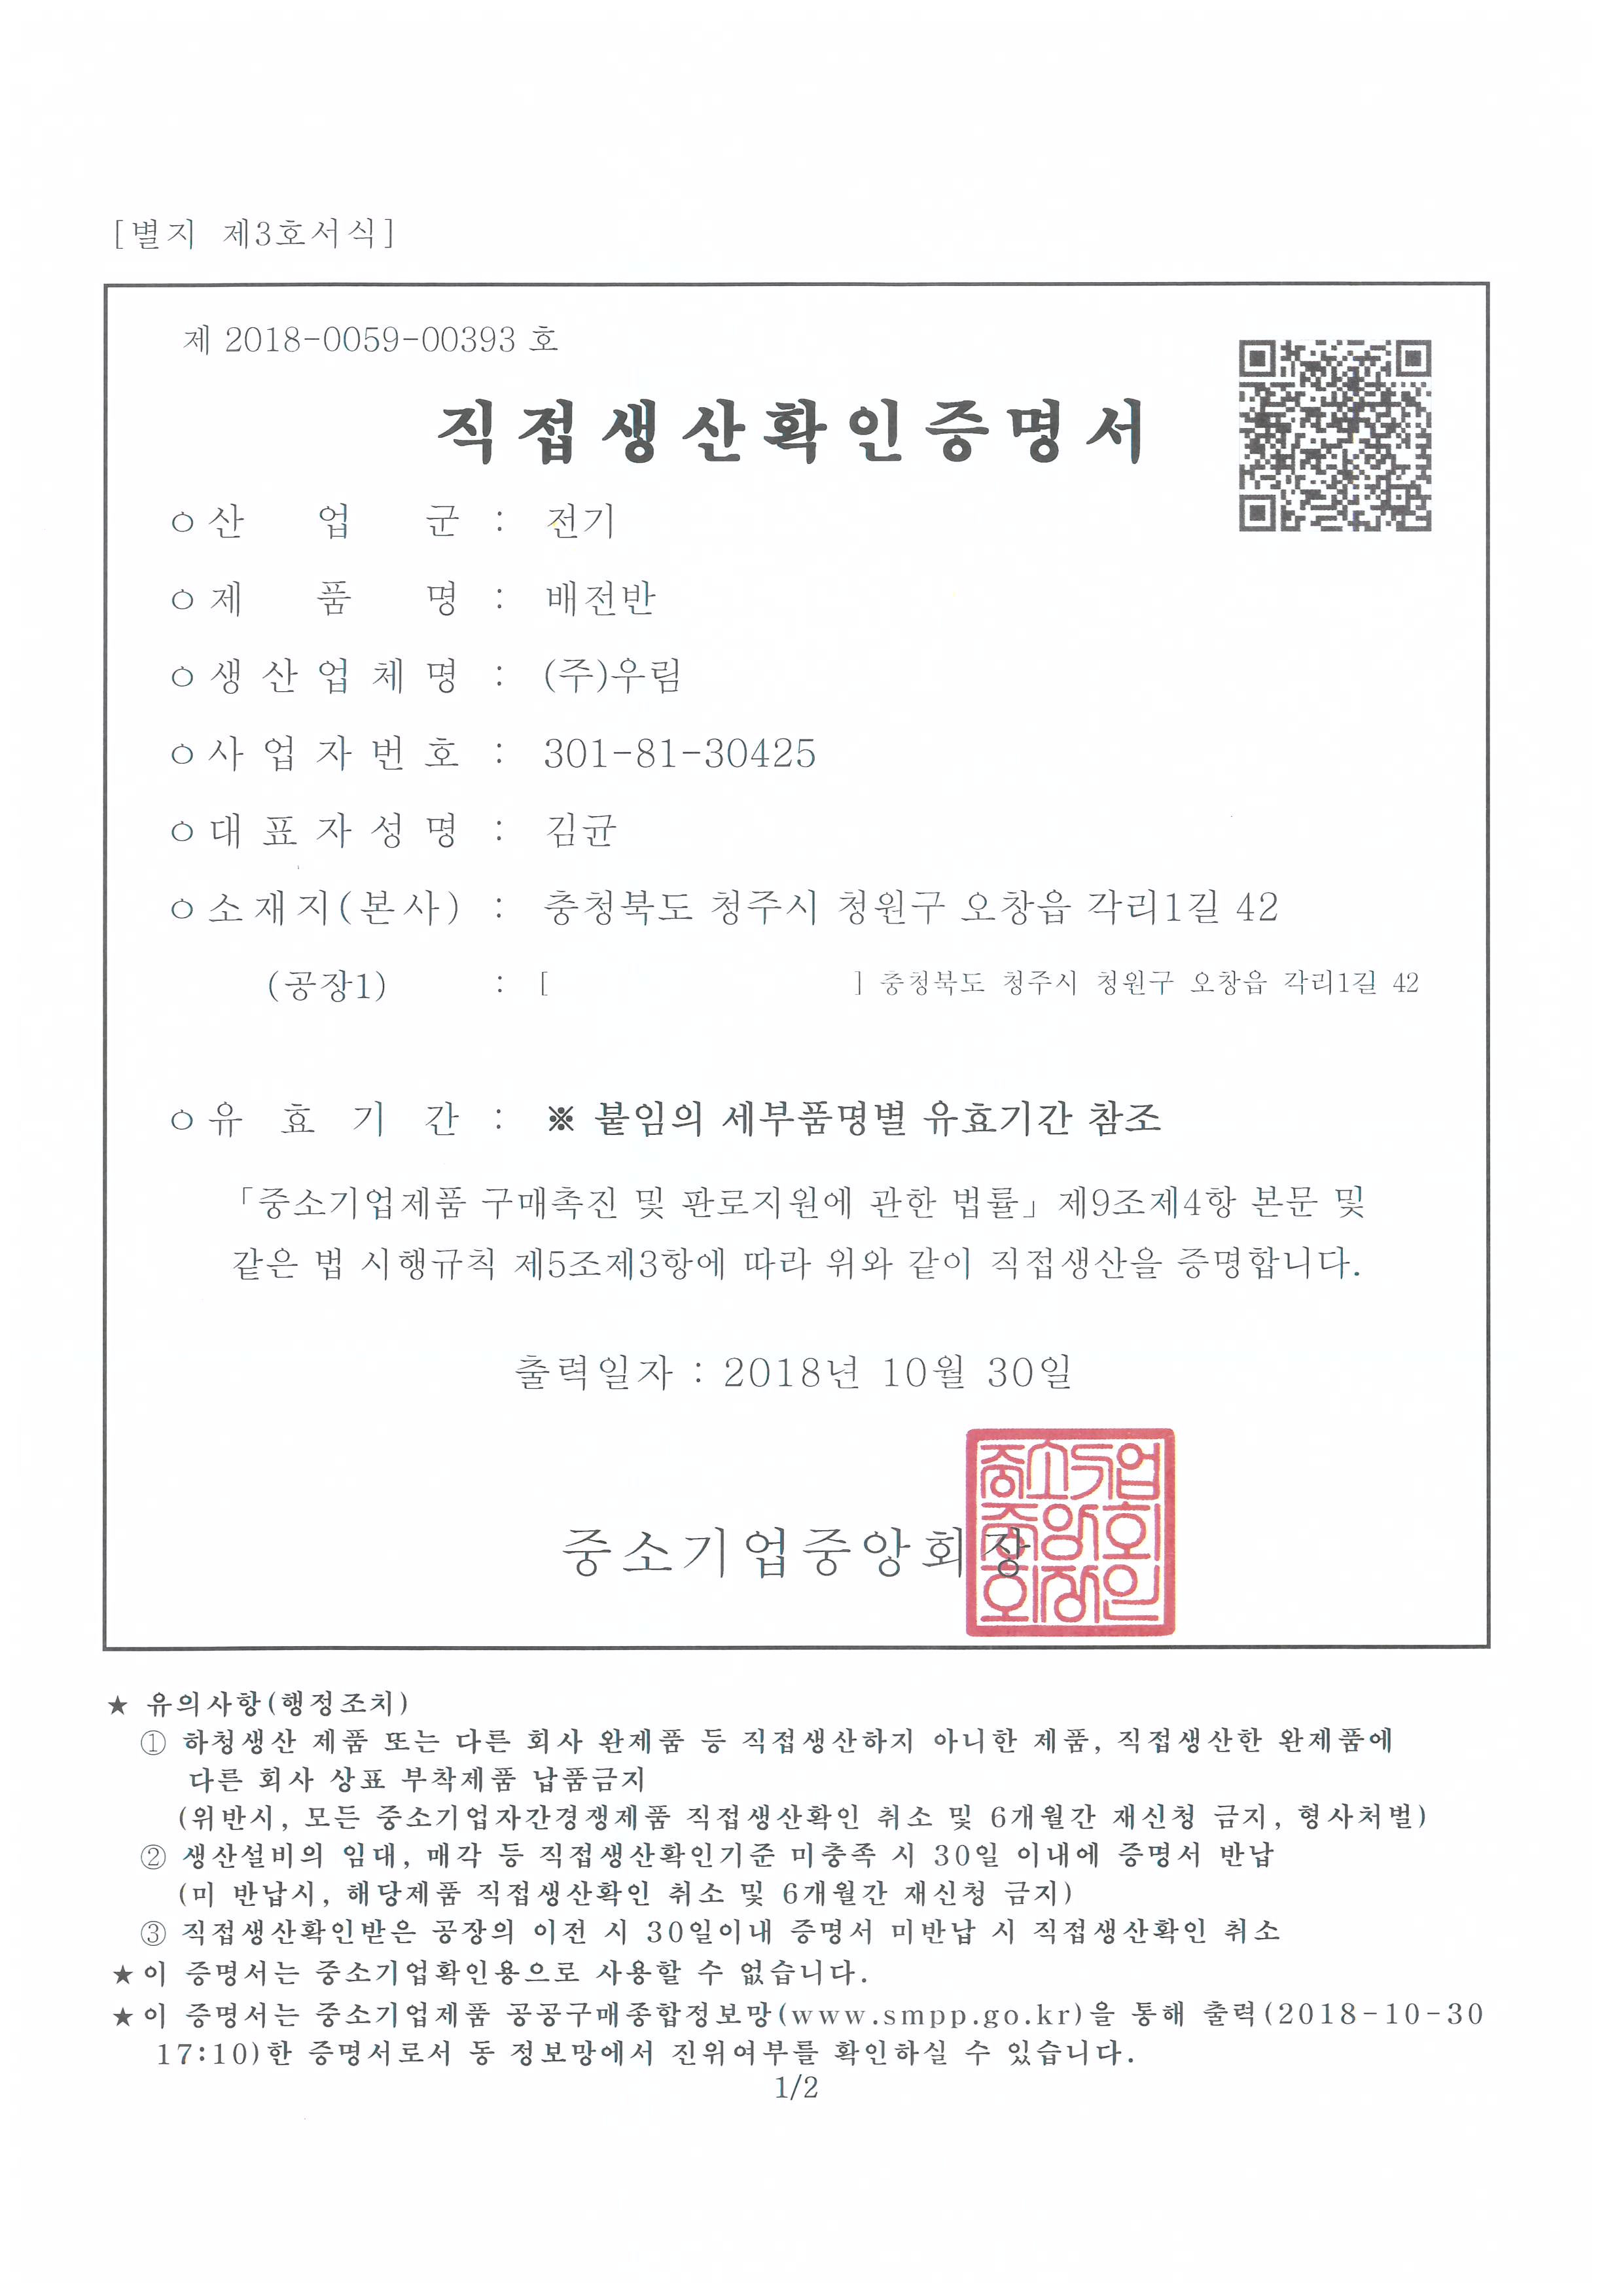 Direct production certificate [첨부 이미지1]